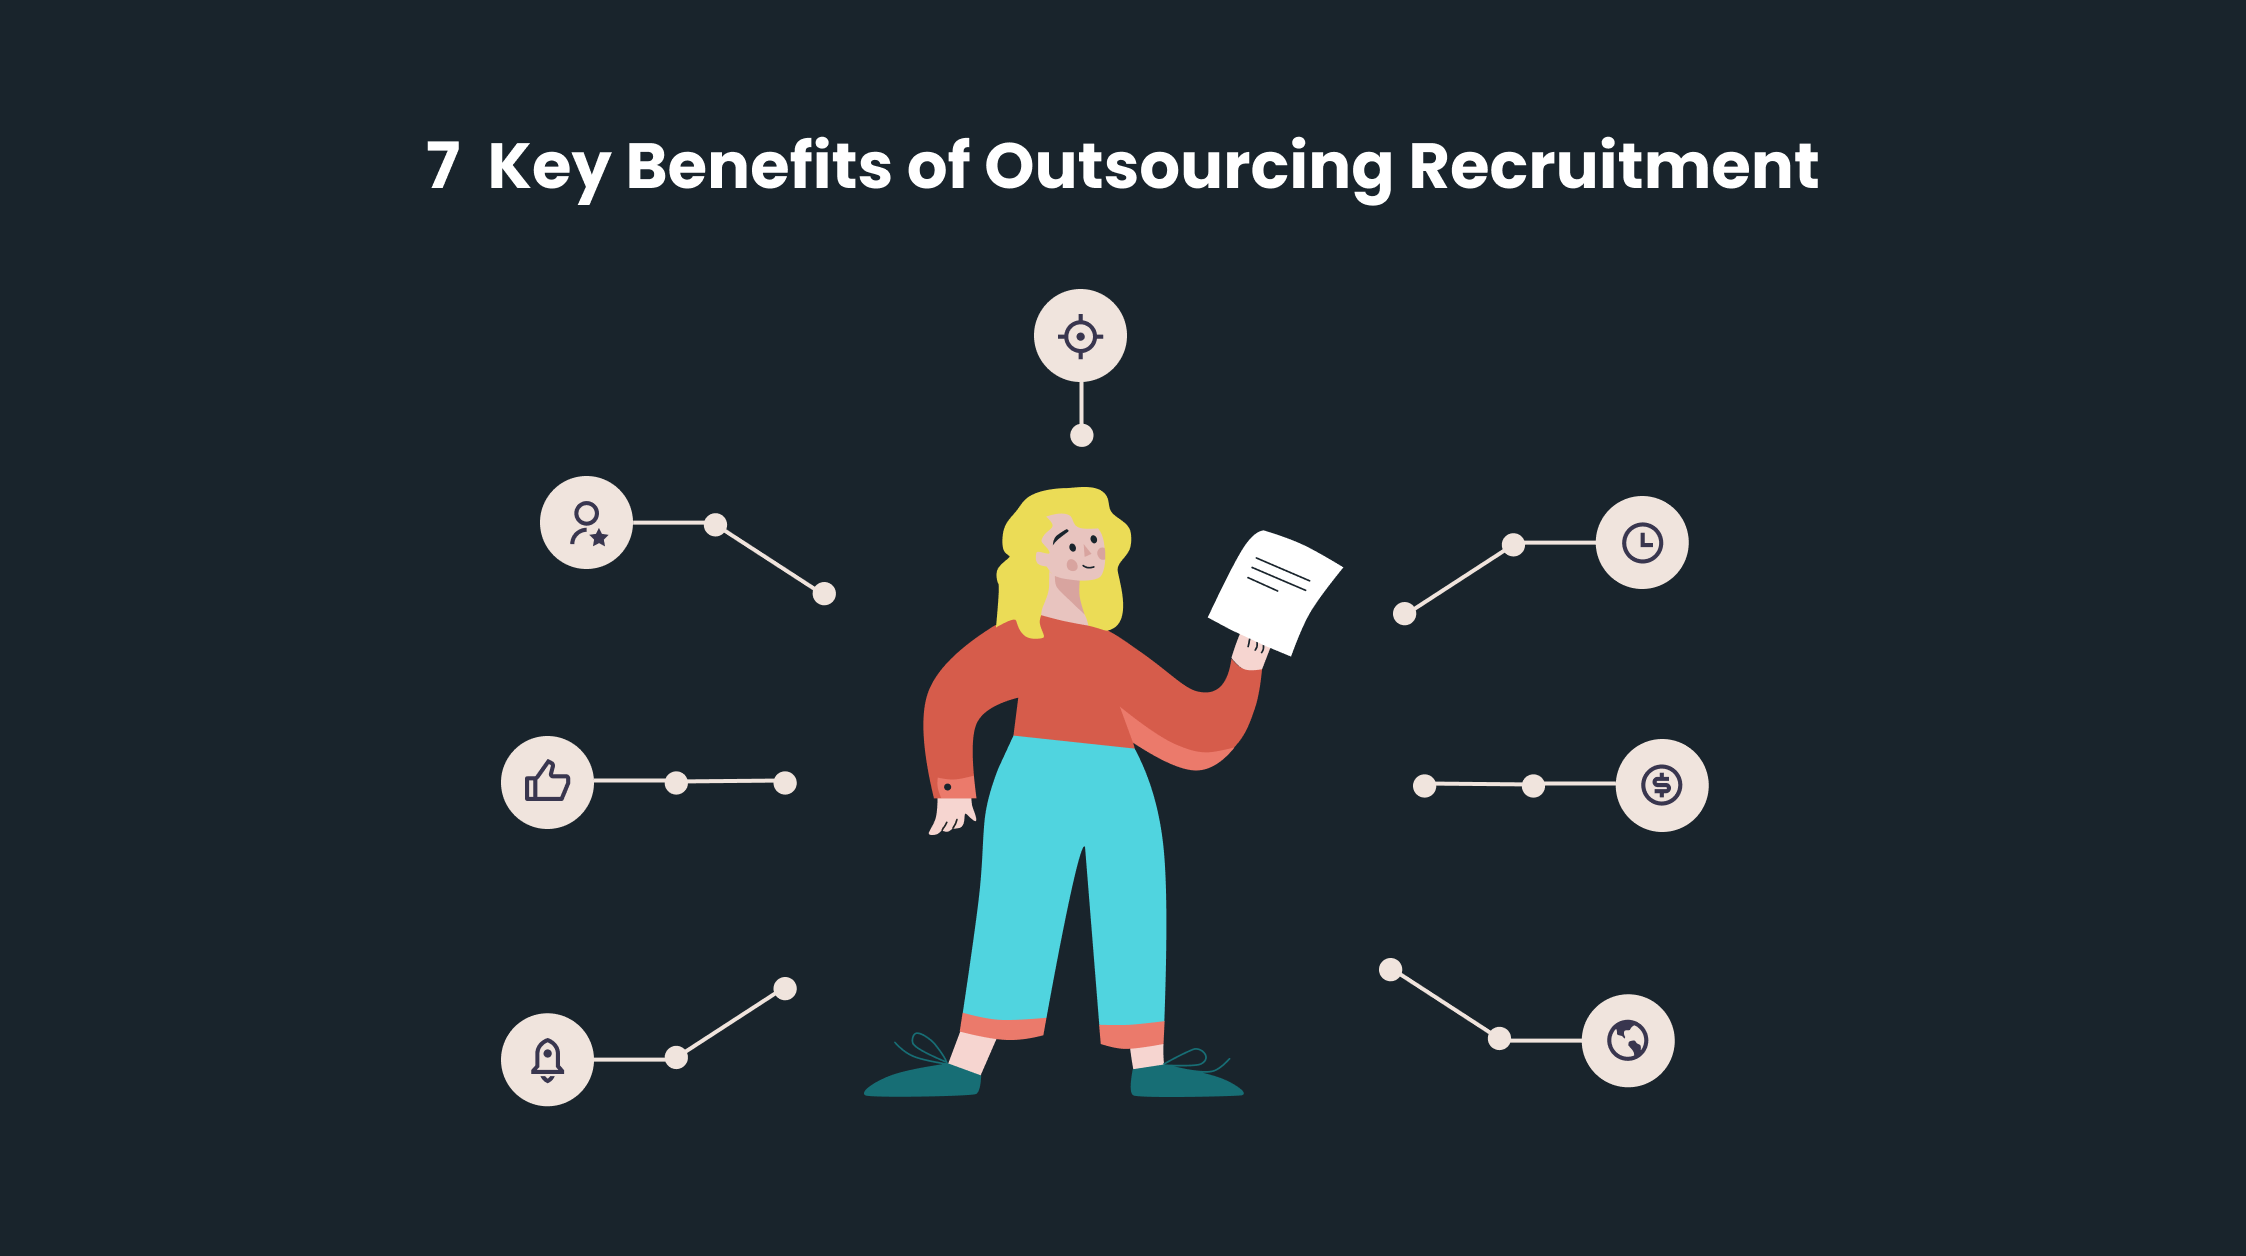 7 Key Benefits of Outsourcing Recruitment